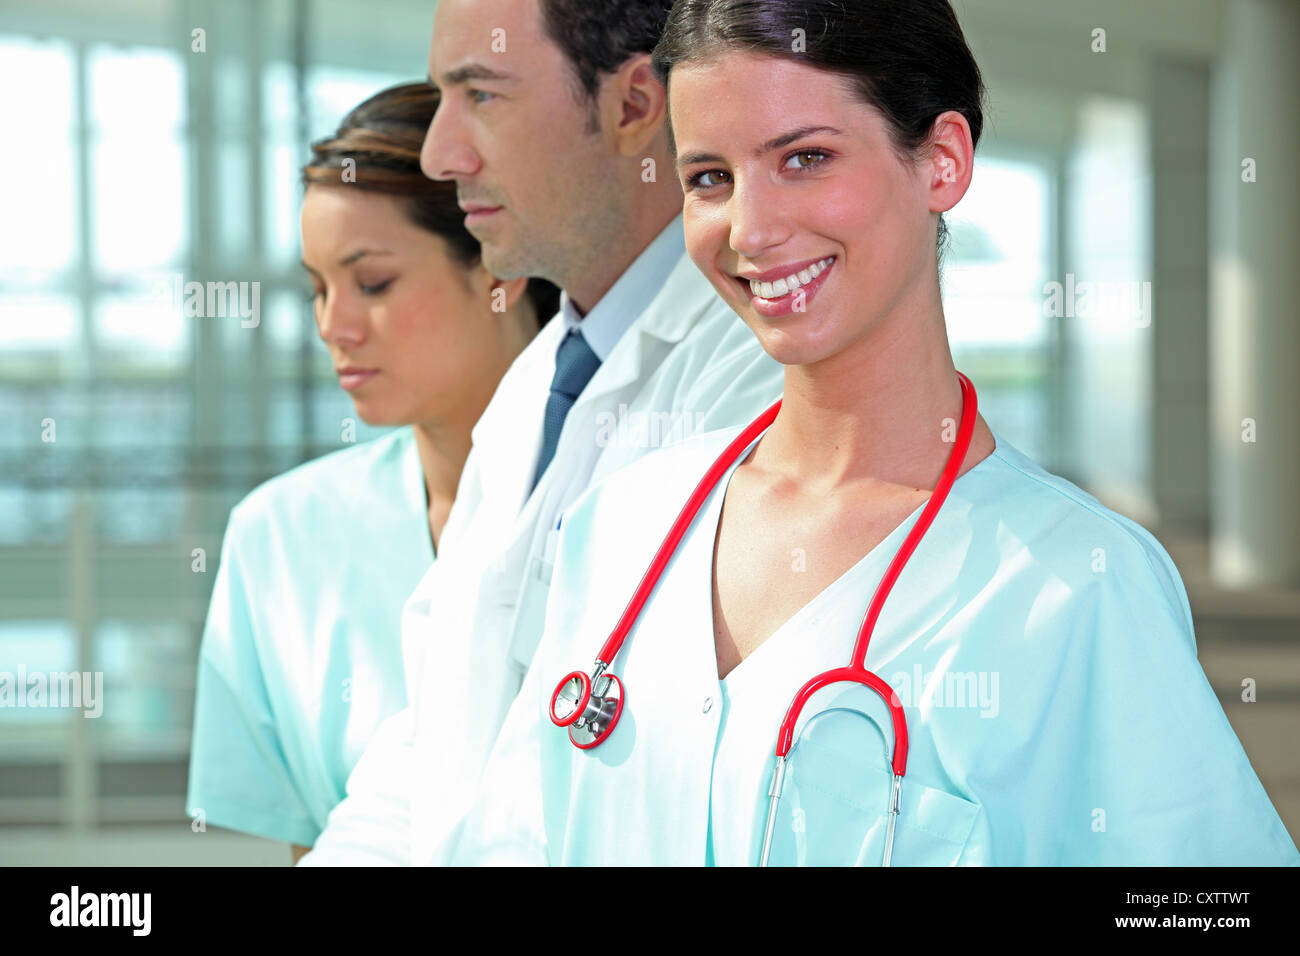 The hospital workers Stock Photo